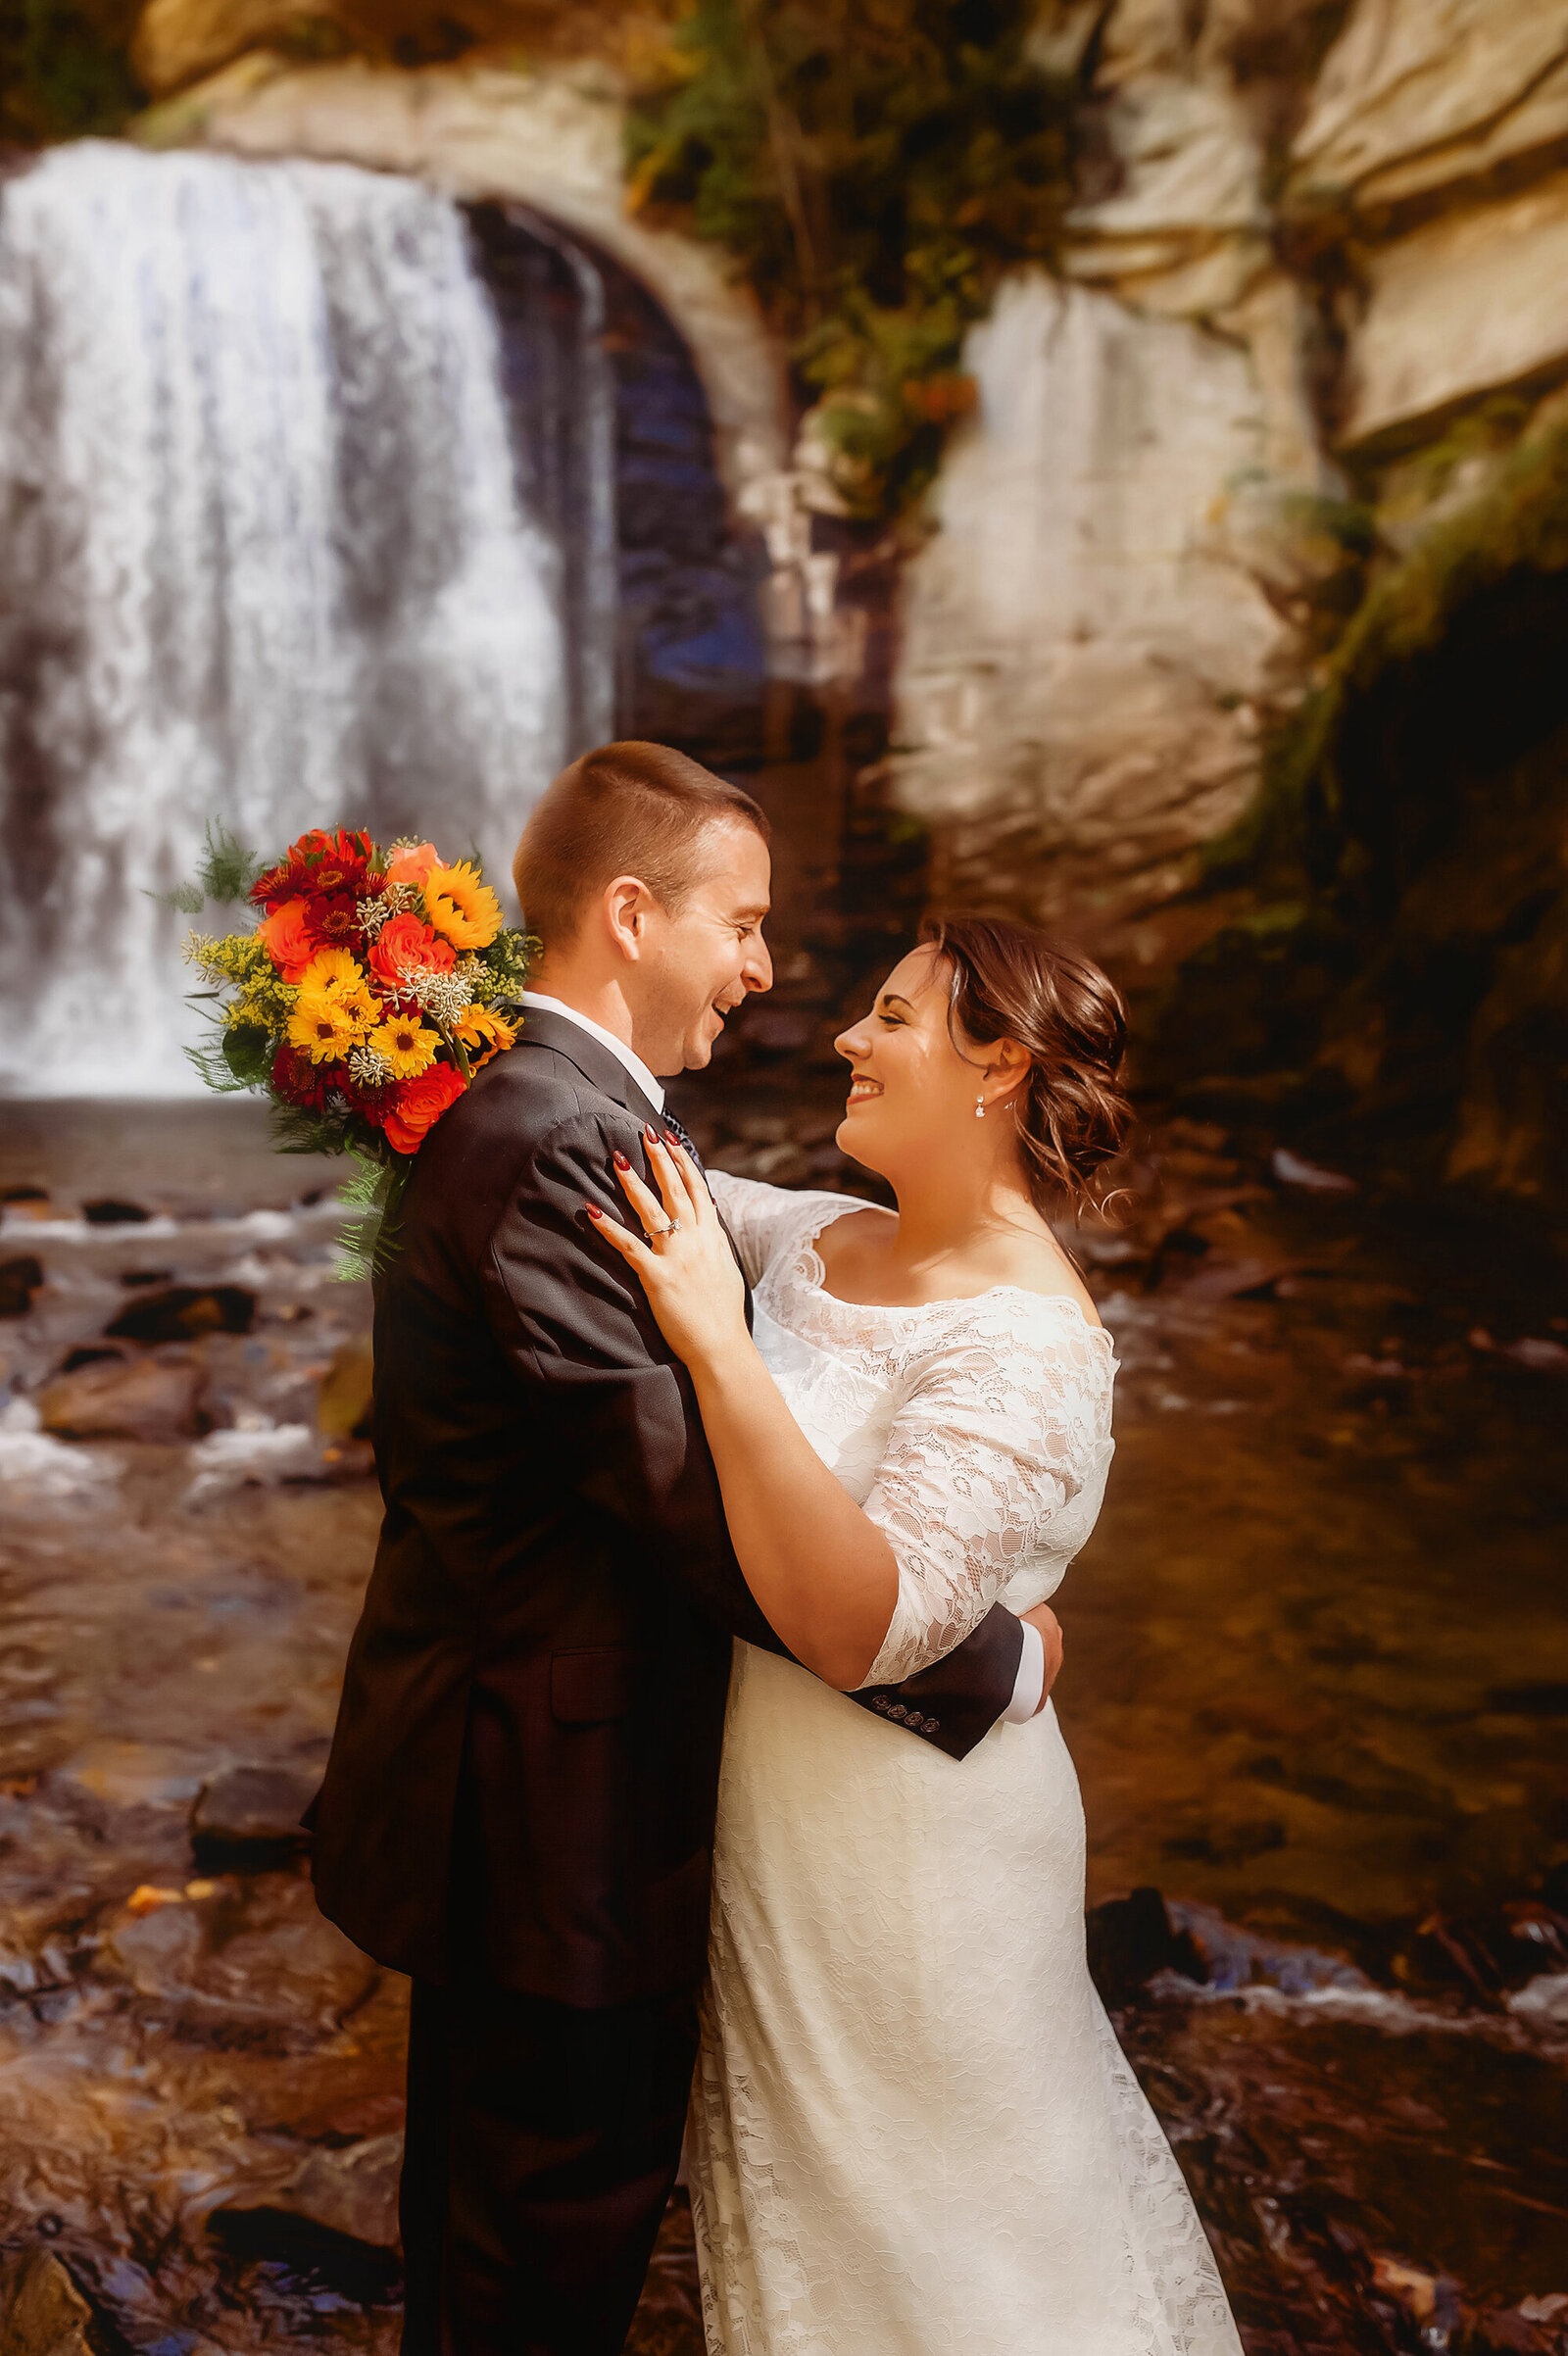 Bride and Groom embrace during their Elopement at Looking Glass Falls in Brevard, NC.